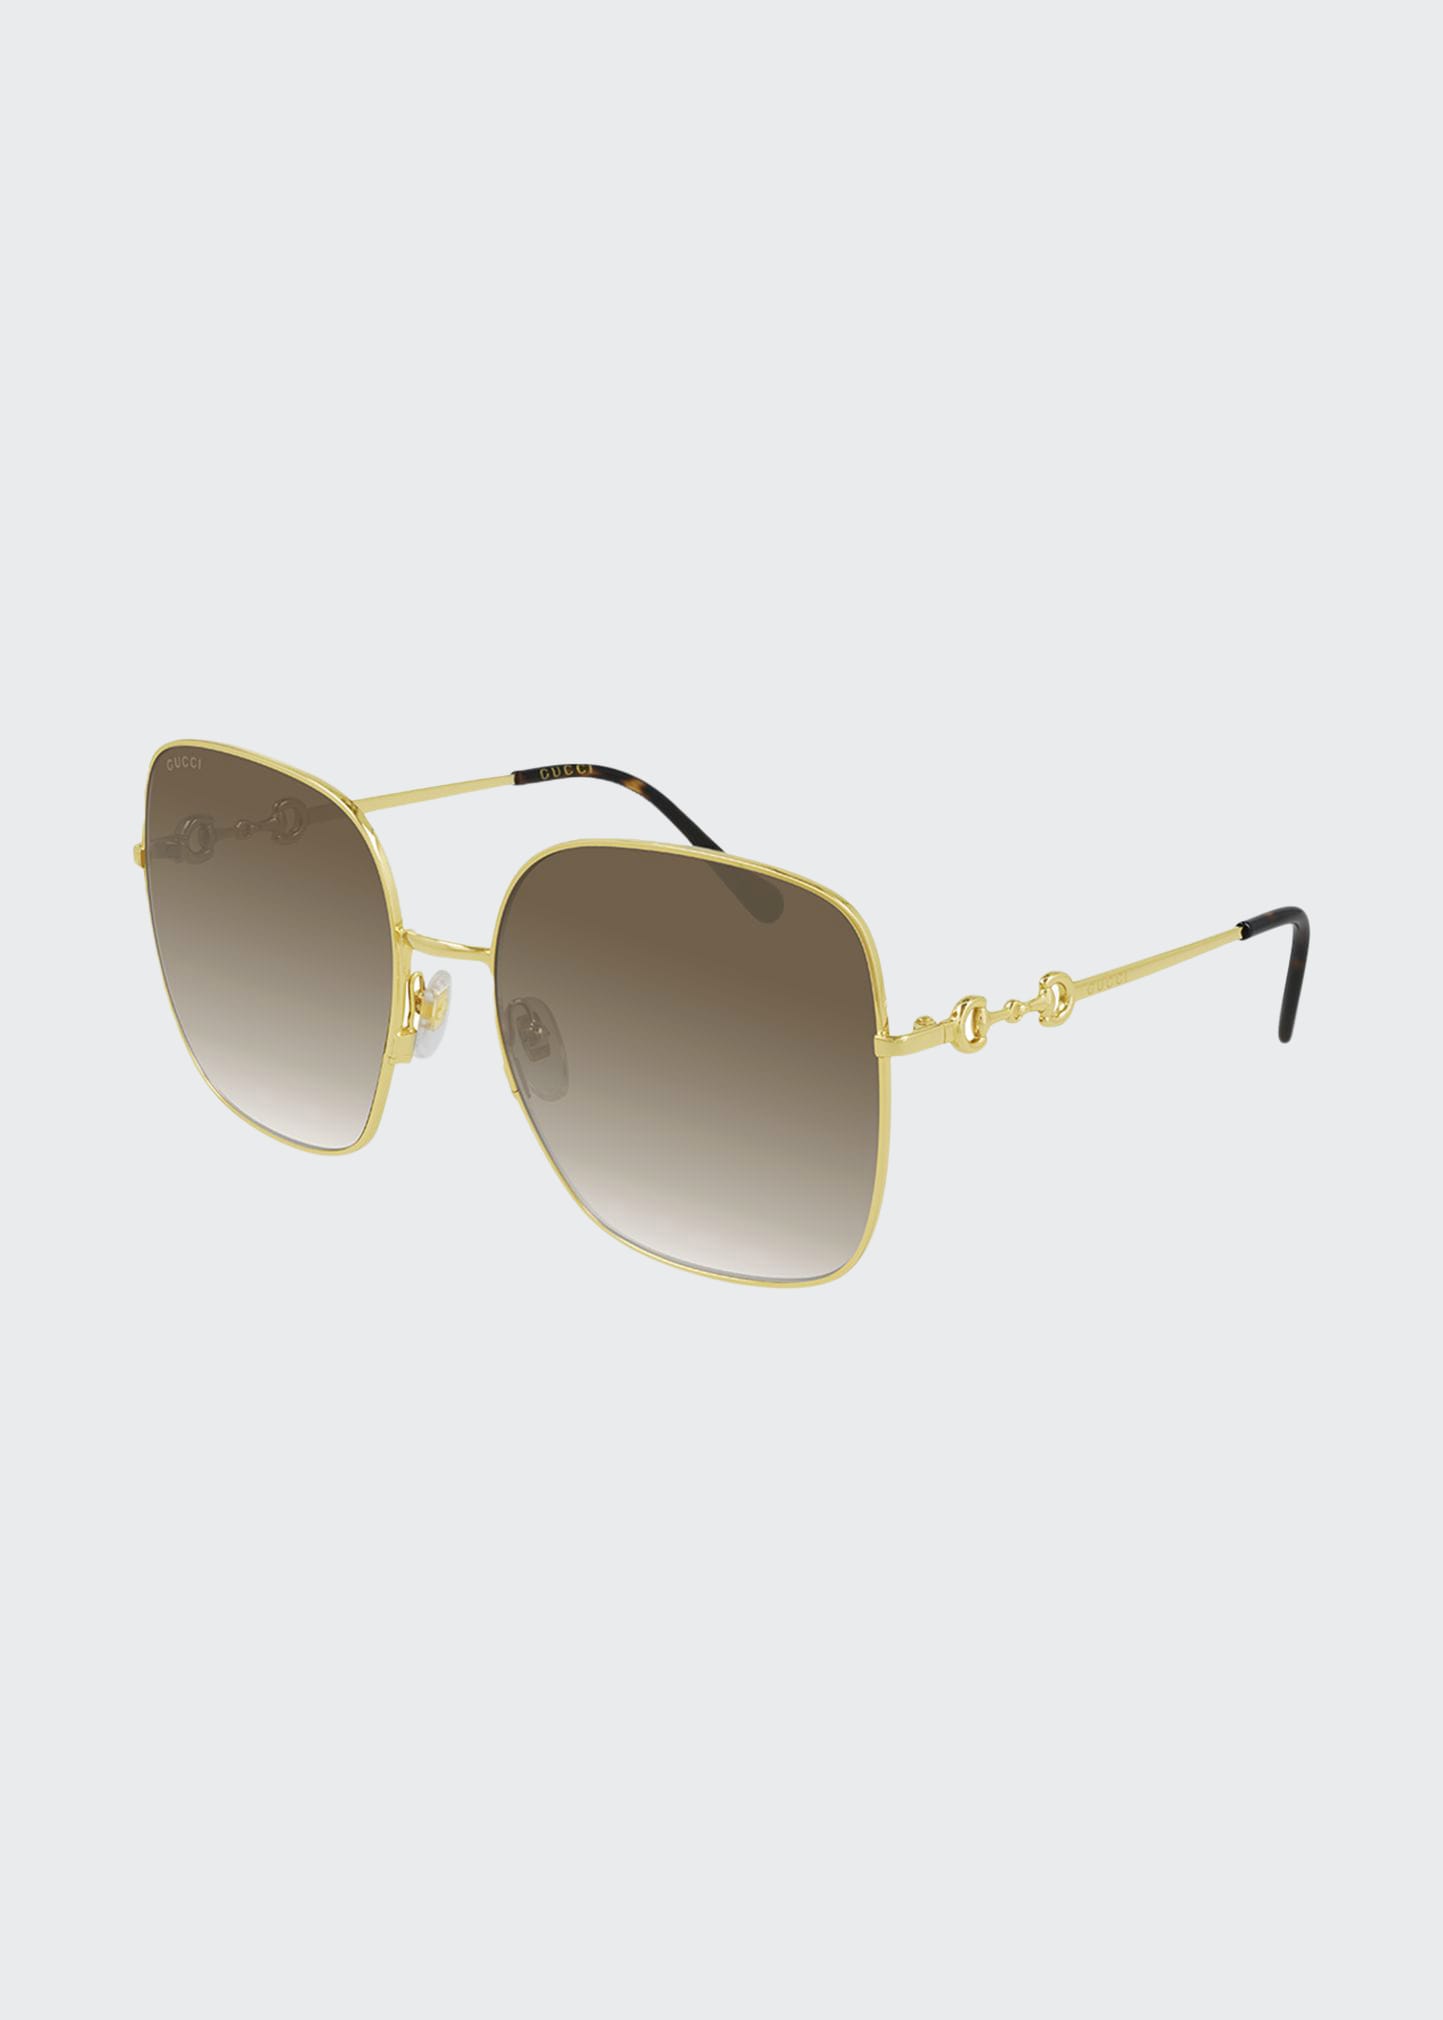 Gucci Oversized Square Metal Sunglasses In 711 Brown Gold